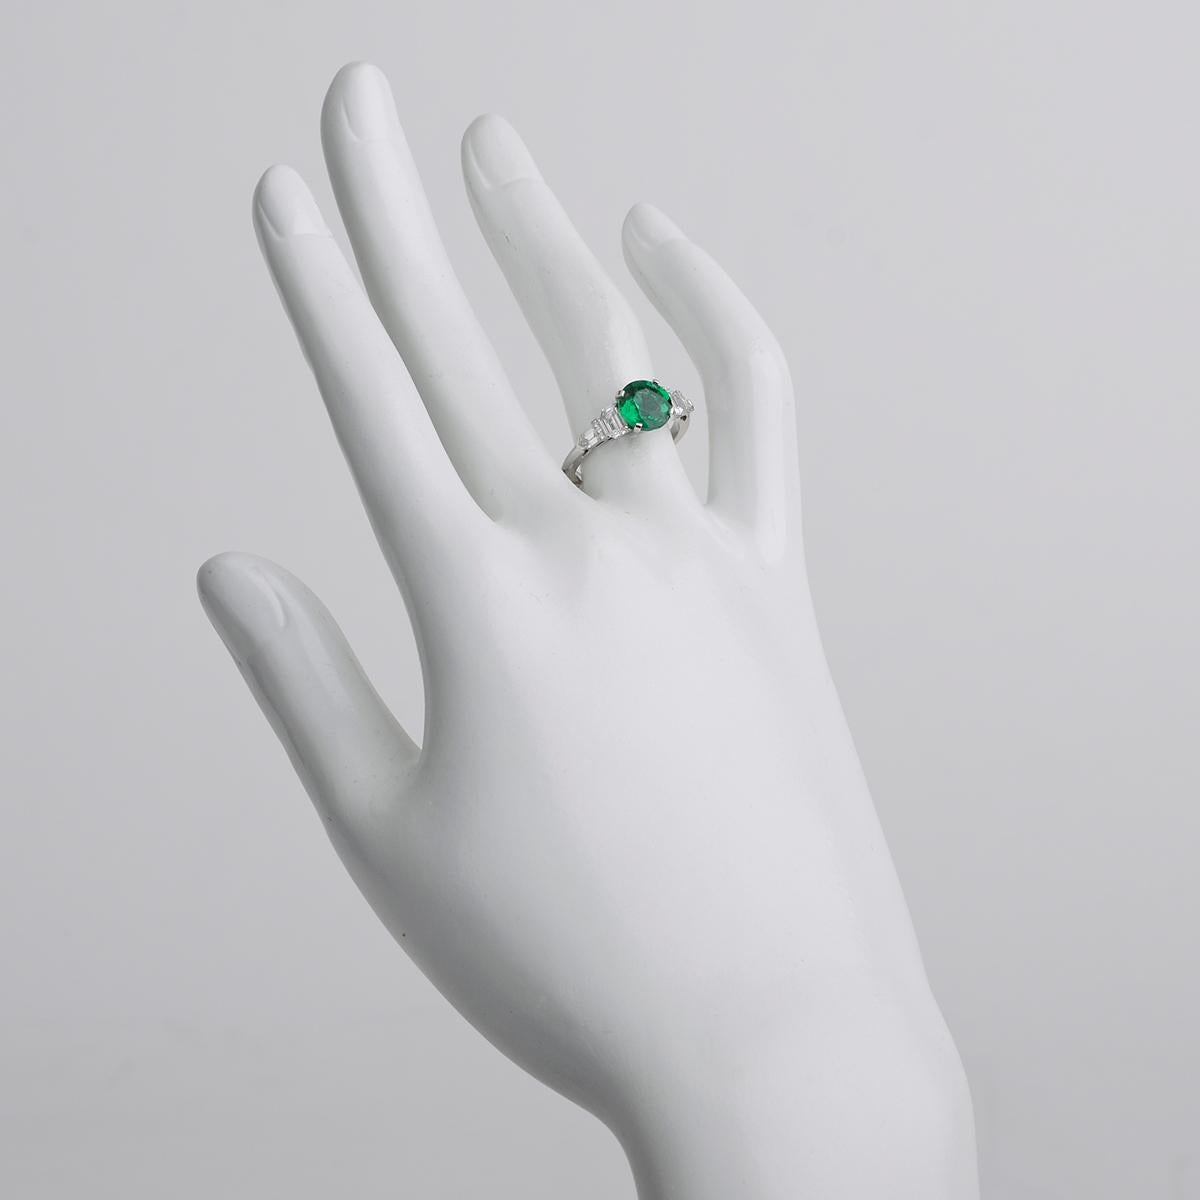 Emerald and diamond ring, centering a round faceted emerald weighing 1.65 carats flanked by two larger modified baguette-cut diamonds with smaller round and bullet-cut diamond accents, in platinum. Diamonds altogether weighing 0.77 total carats.